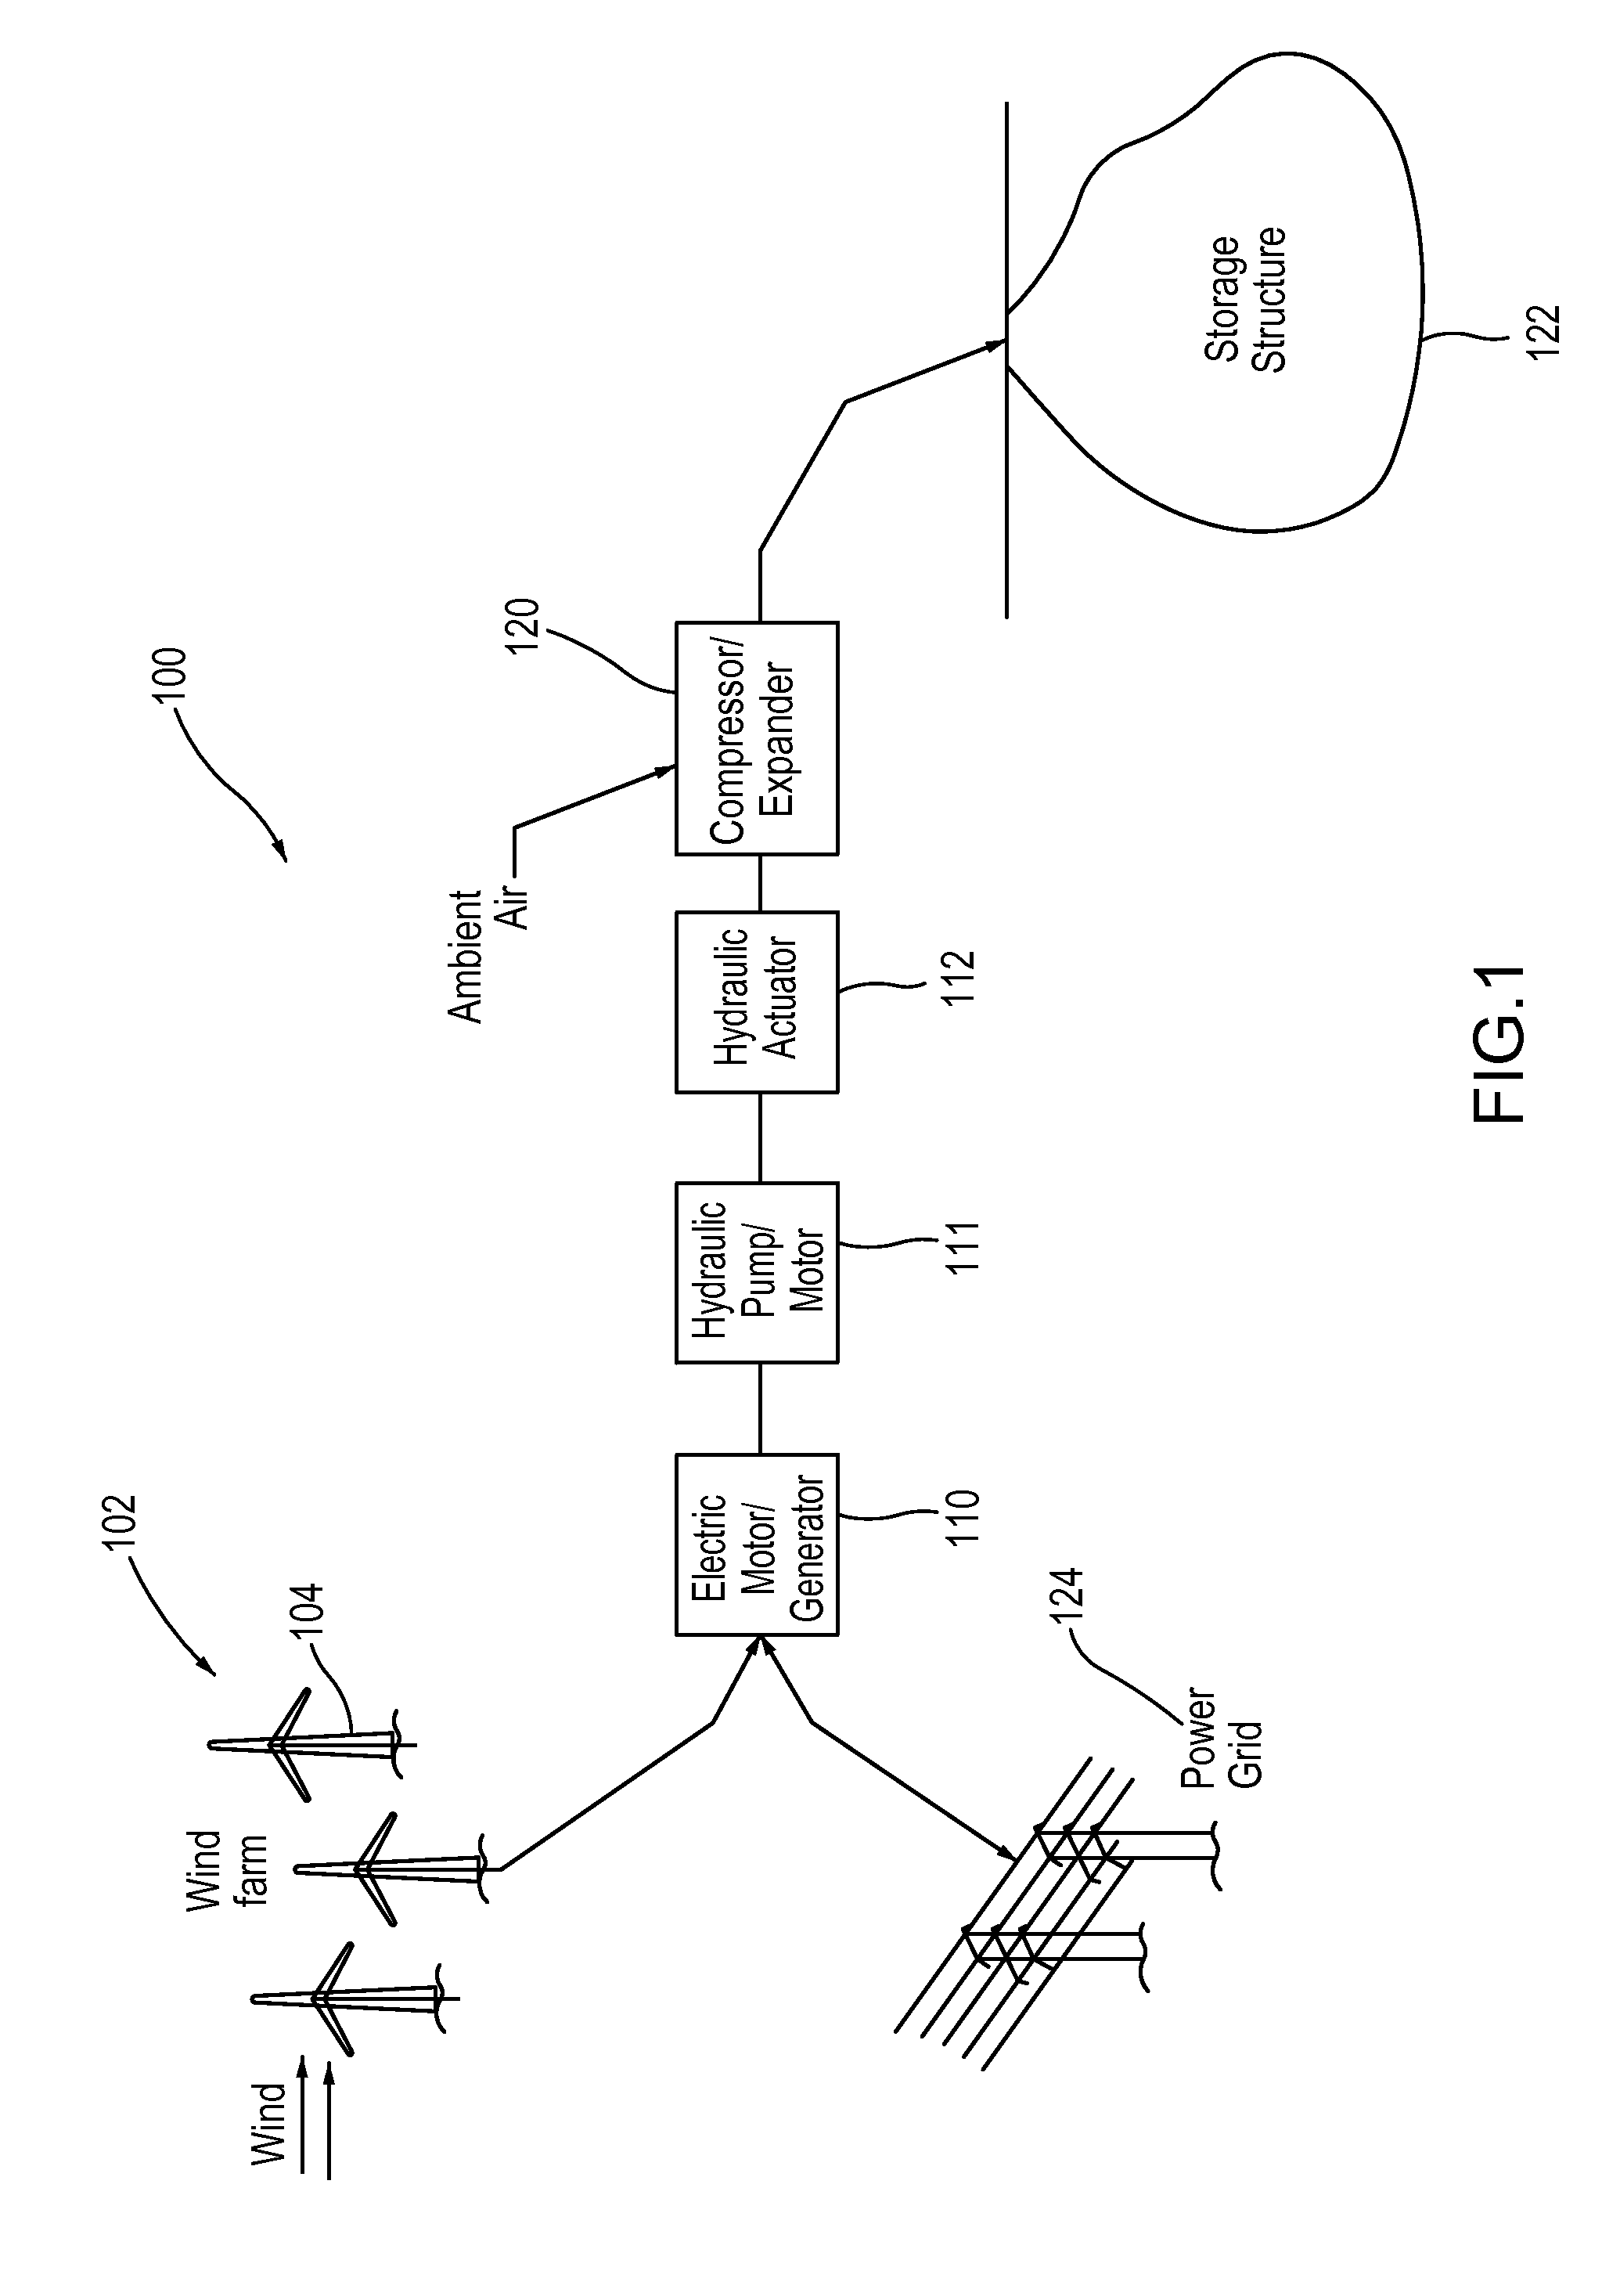 System and methods for optimizing efficiency of a hydraulically actuated system